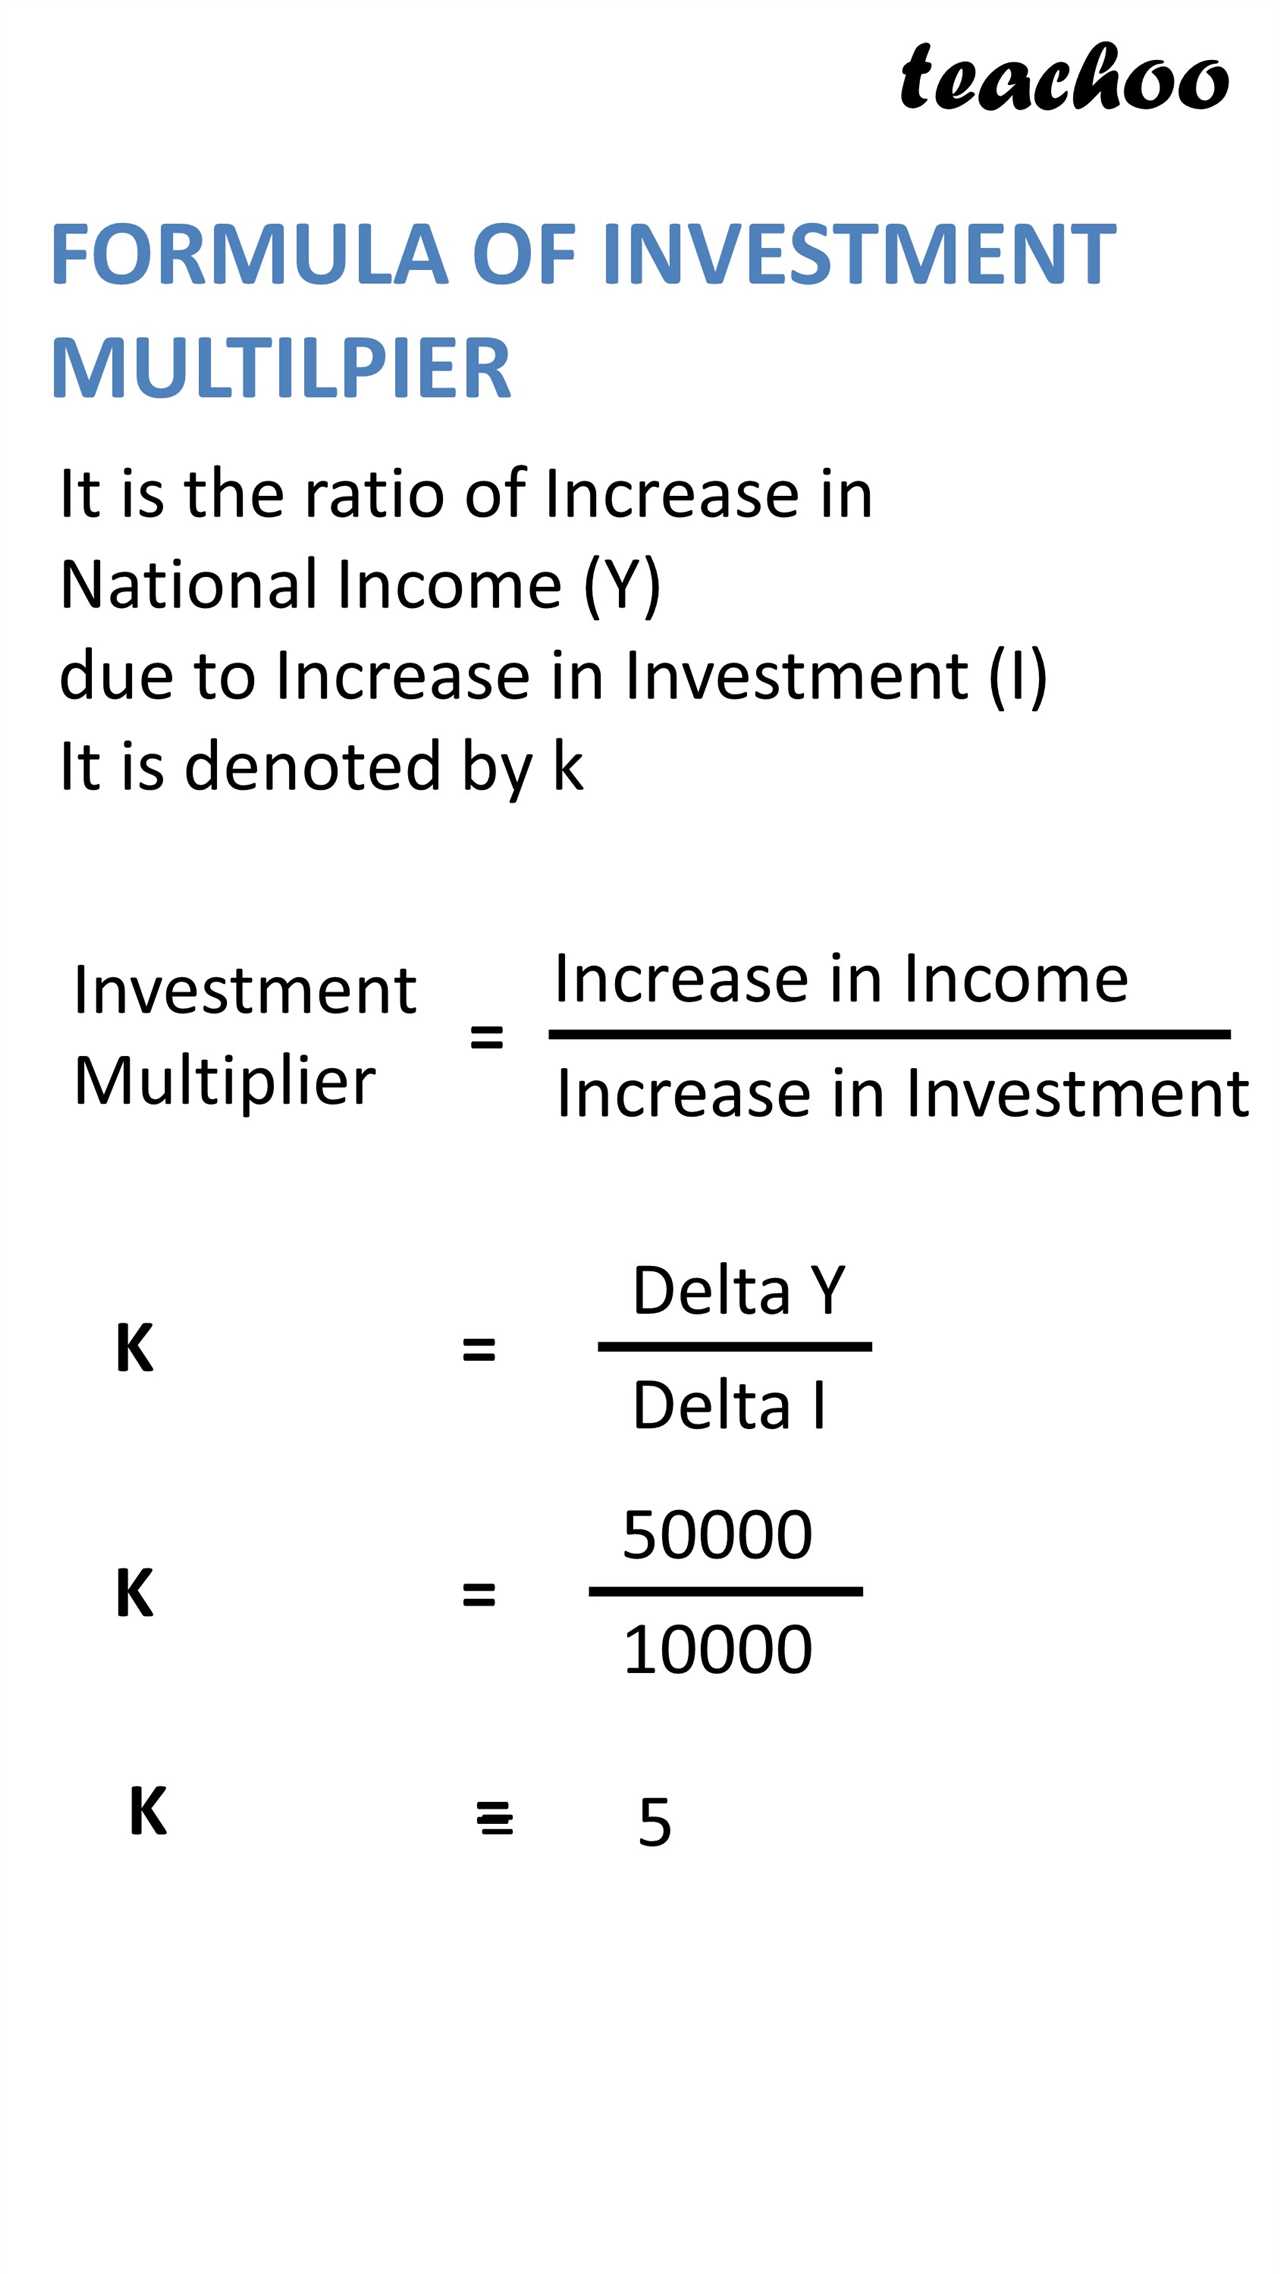 How Does the Investment Multiplier Work?